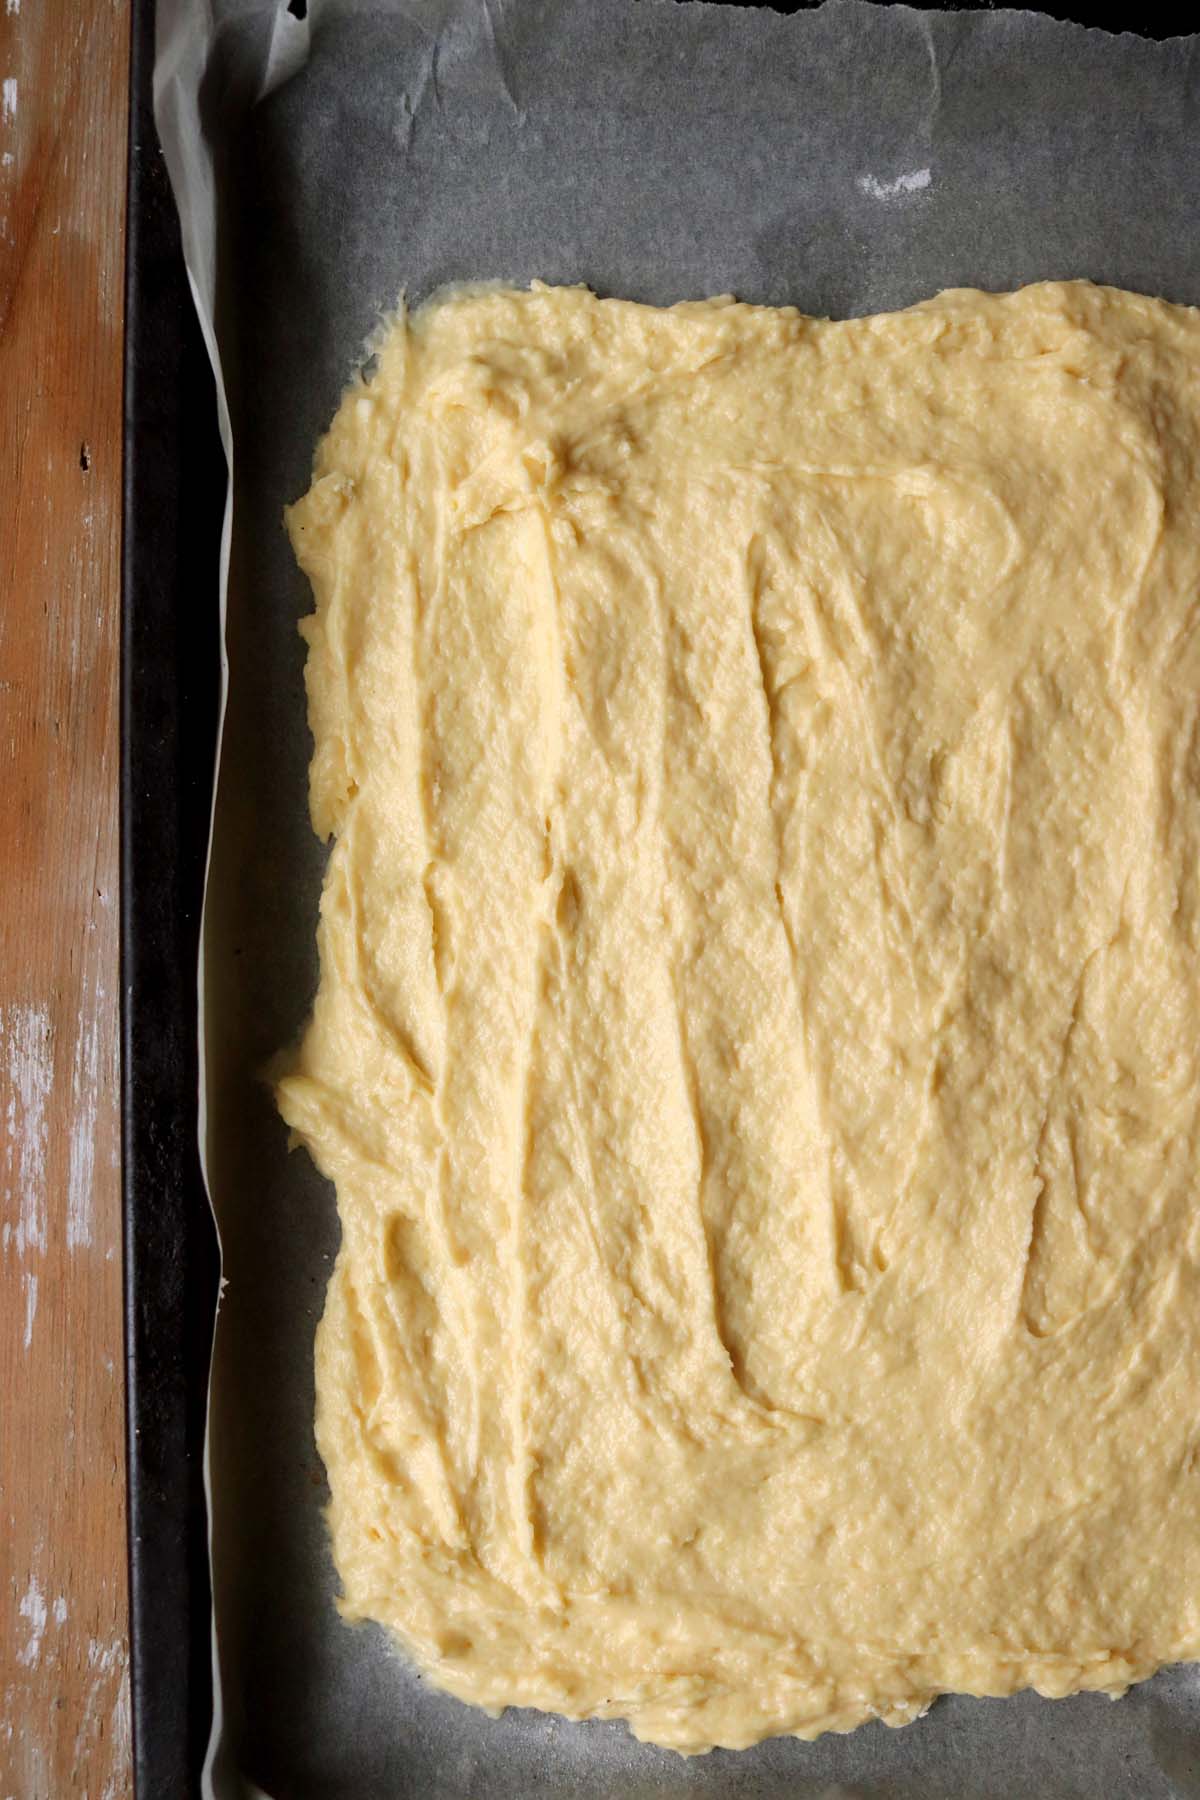 Sugar cookie dough spread in a baking sheet lined with parchment paper.